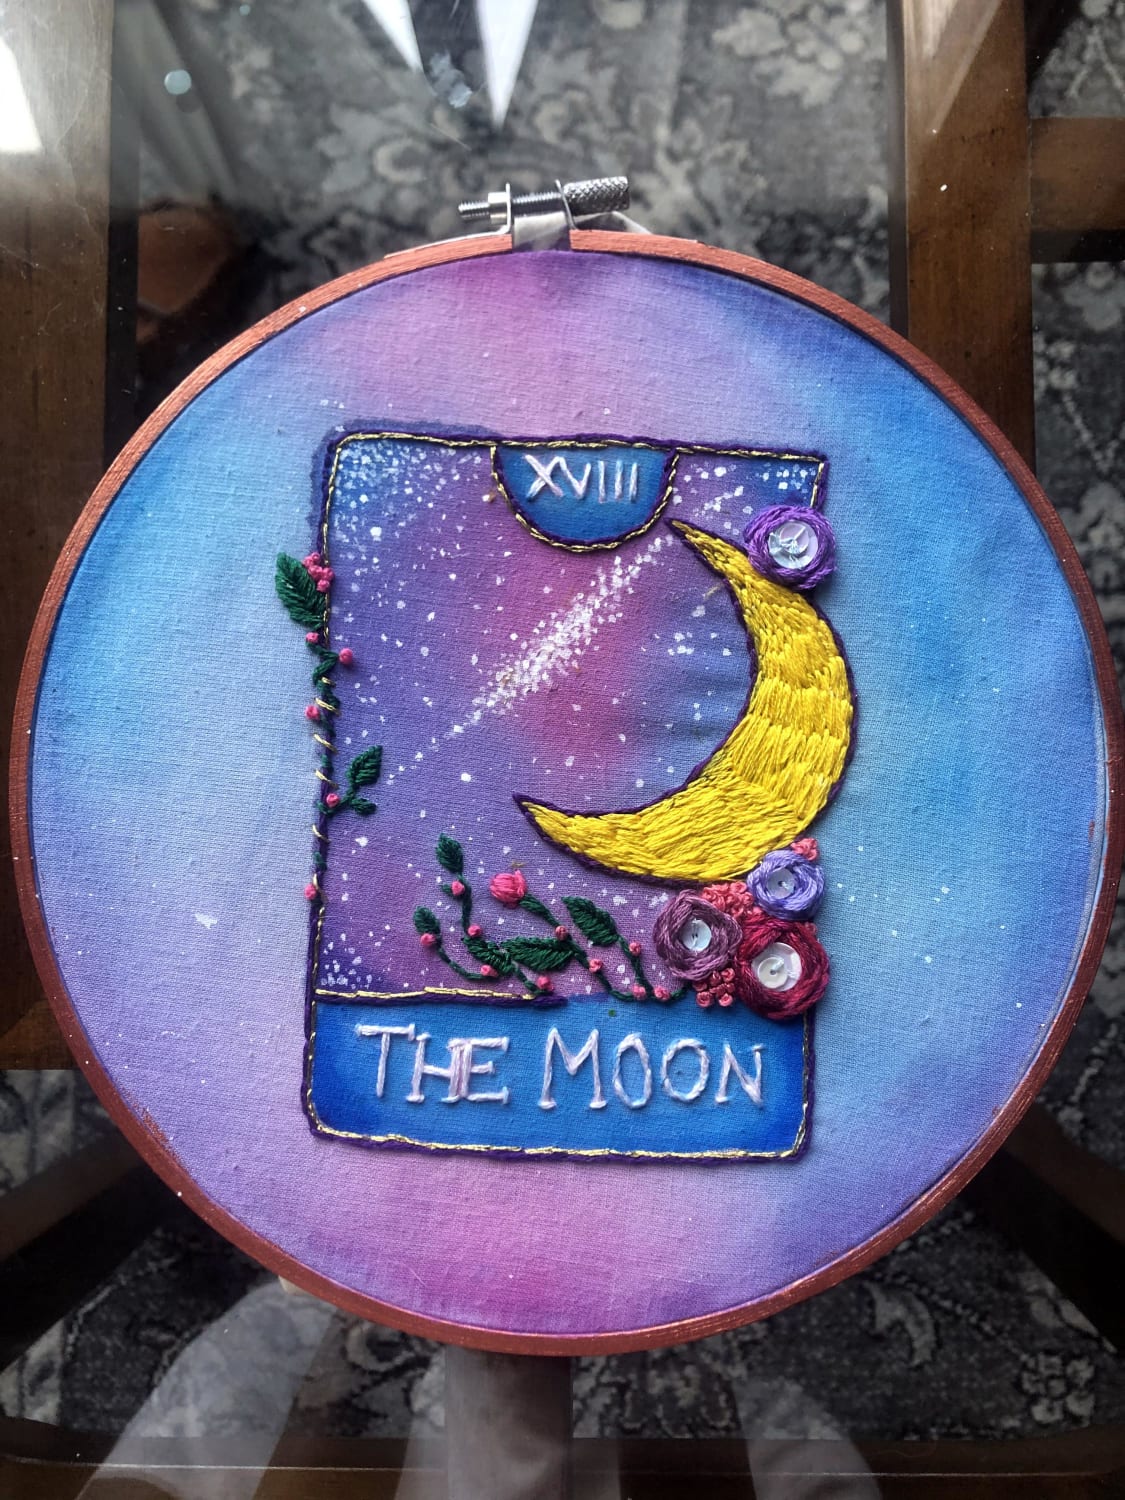 The Moon Tarot Card I made in October to try and keep things magical despite pandemic